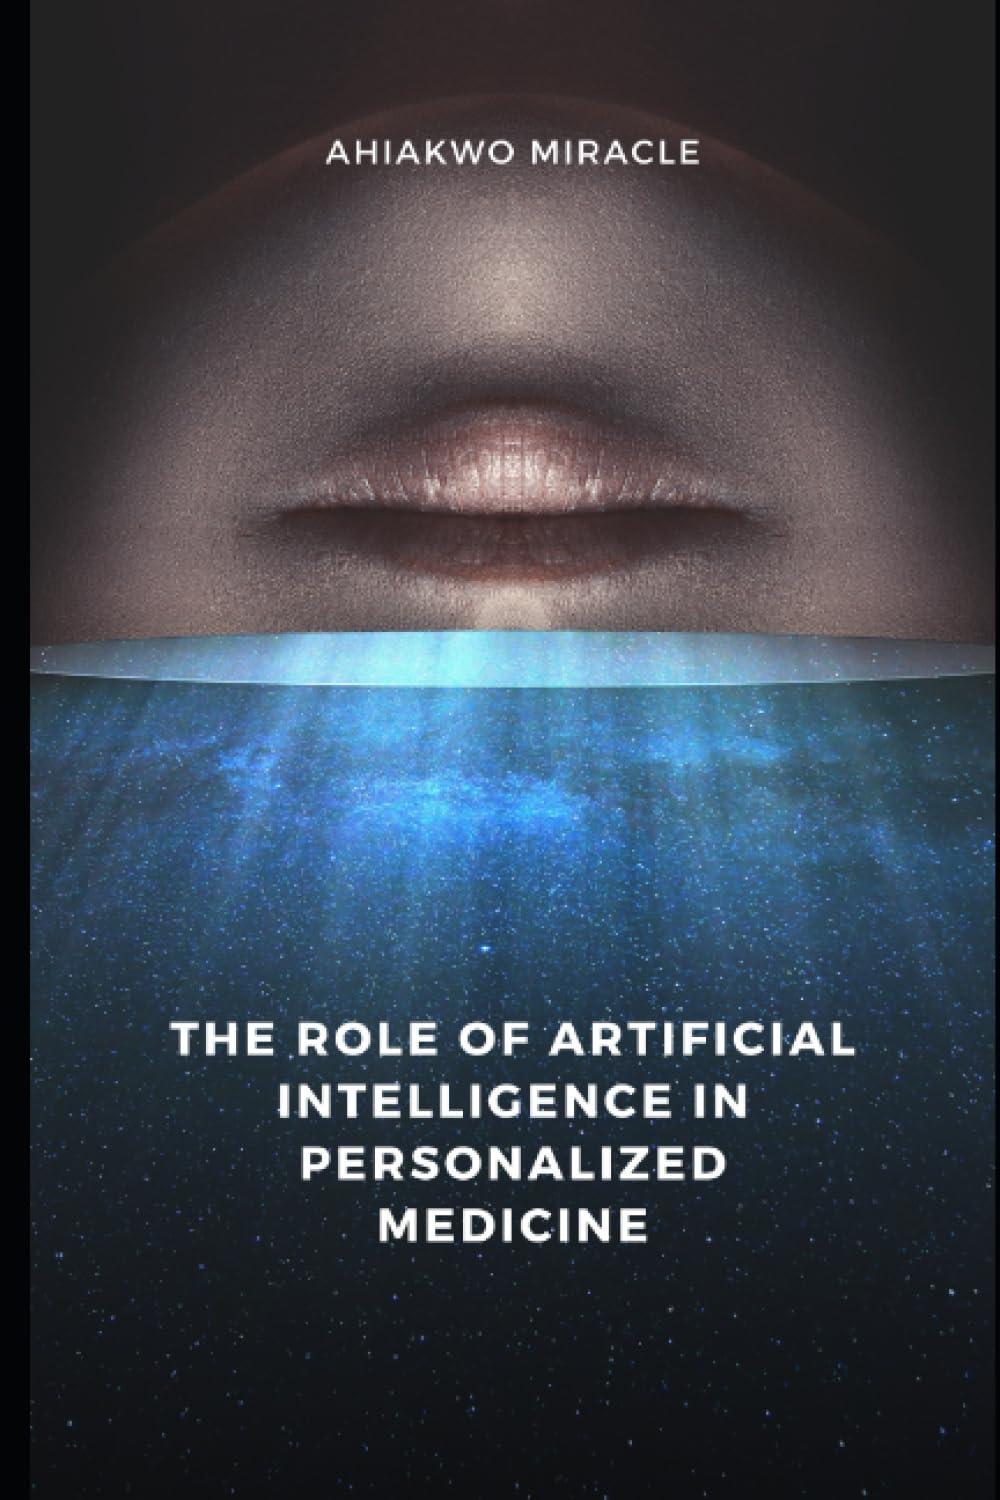 the role of artificial intelligence in personalized medicine 1st edition ahiakwo miracle b0cdncjffk,